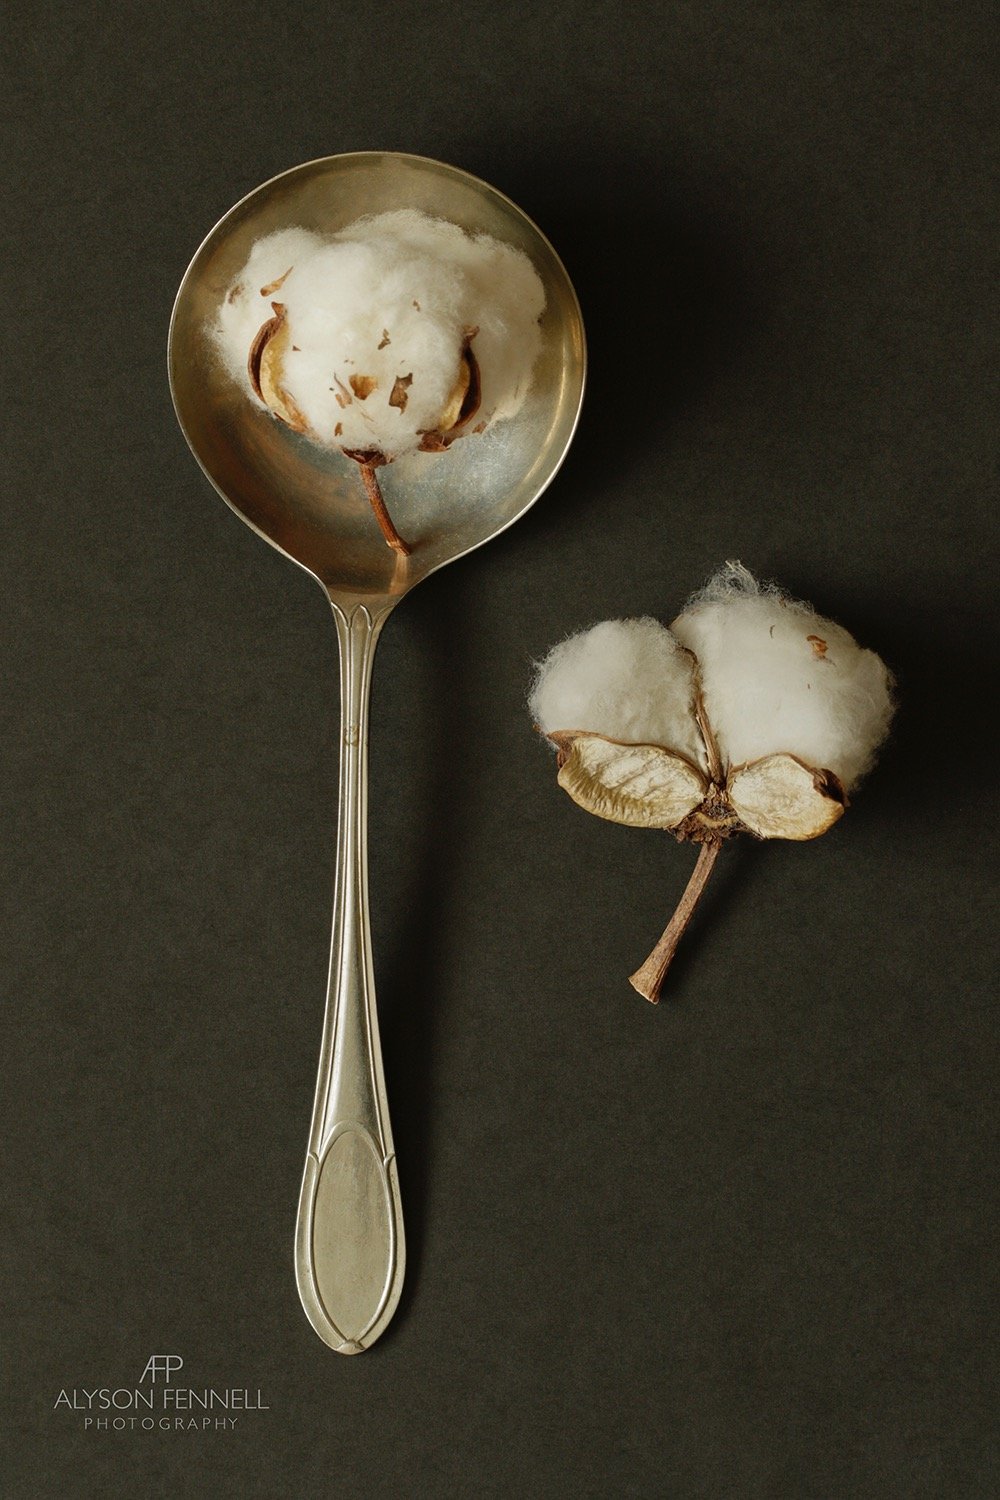 Cotton and Spoon